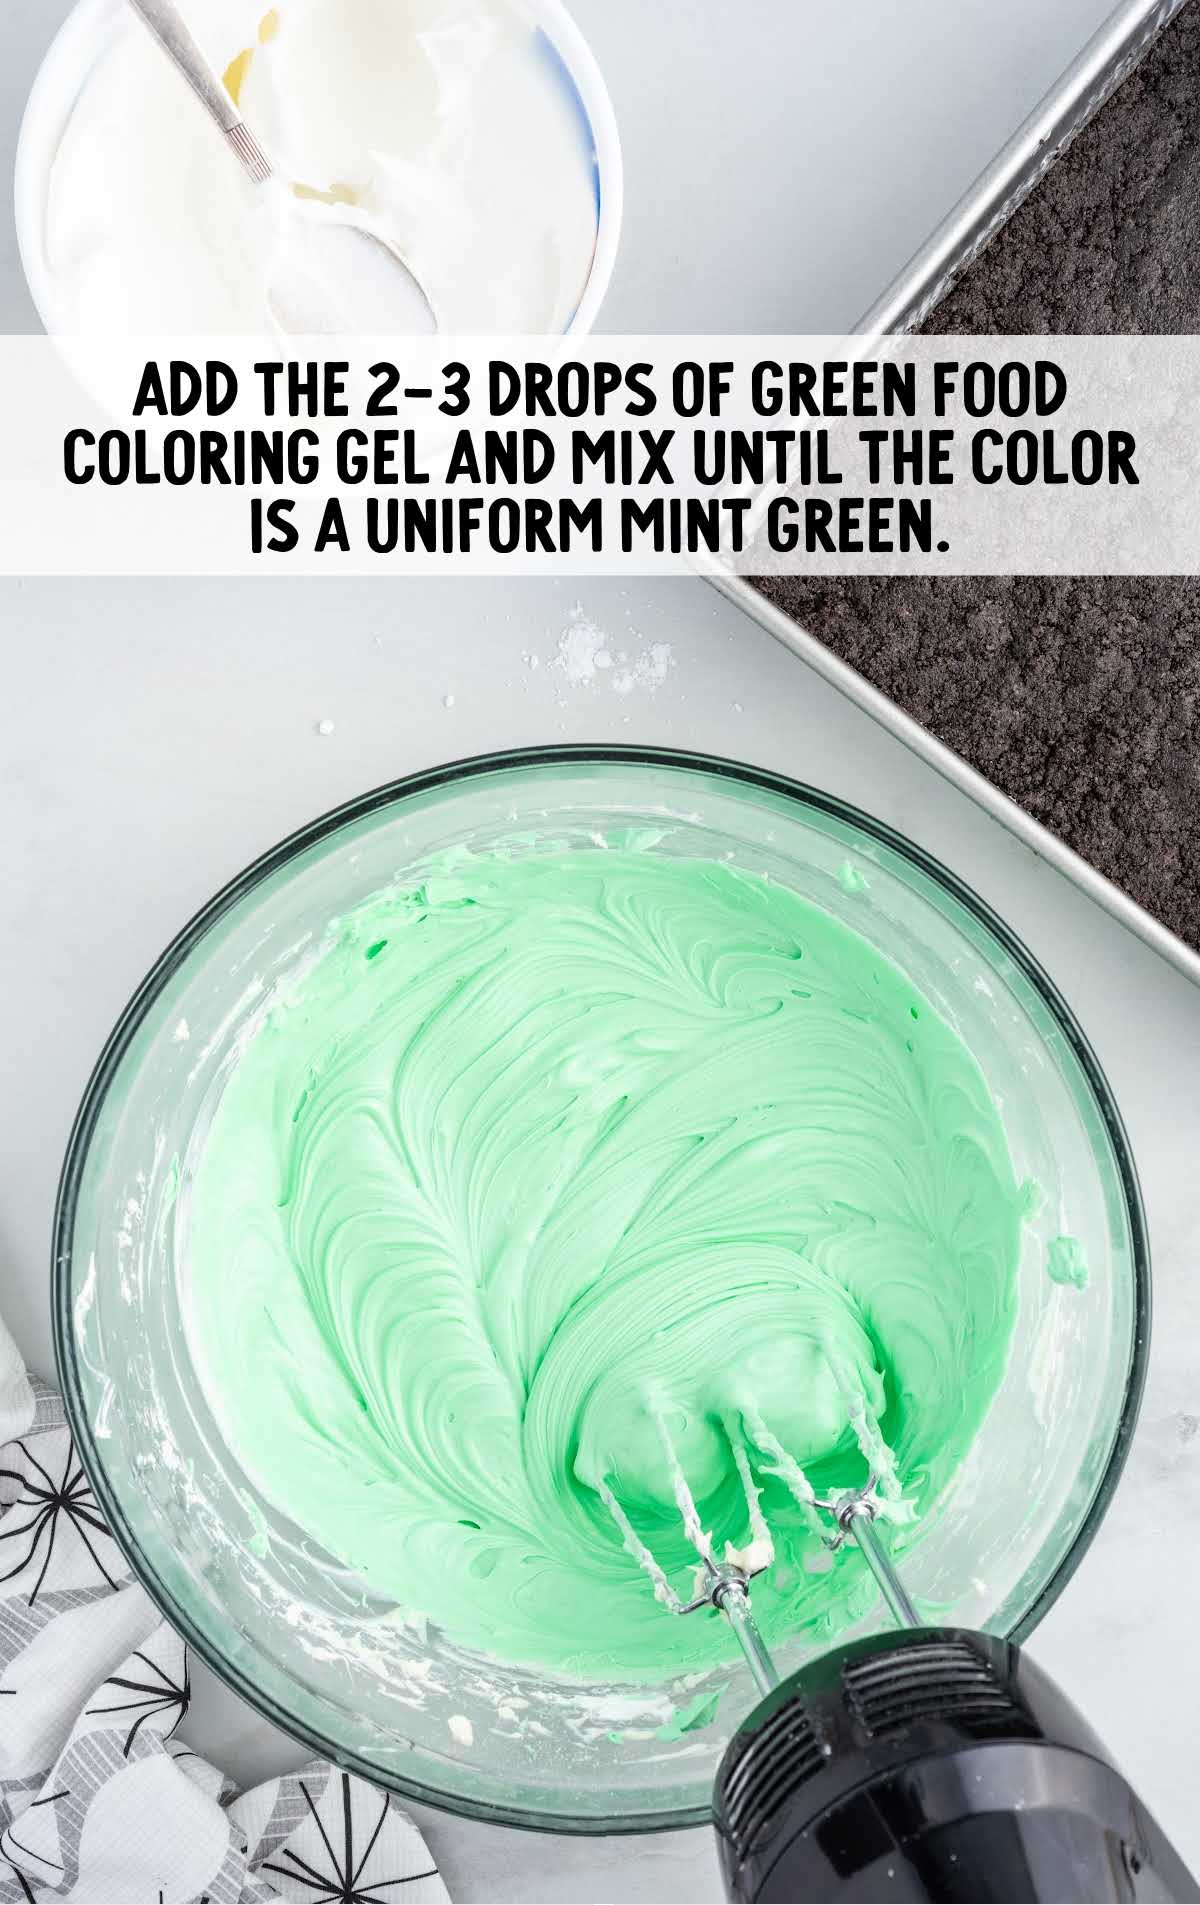 green food drop blended to the mixture in a bowl